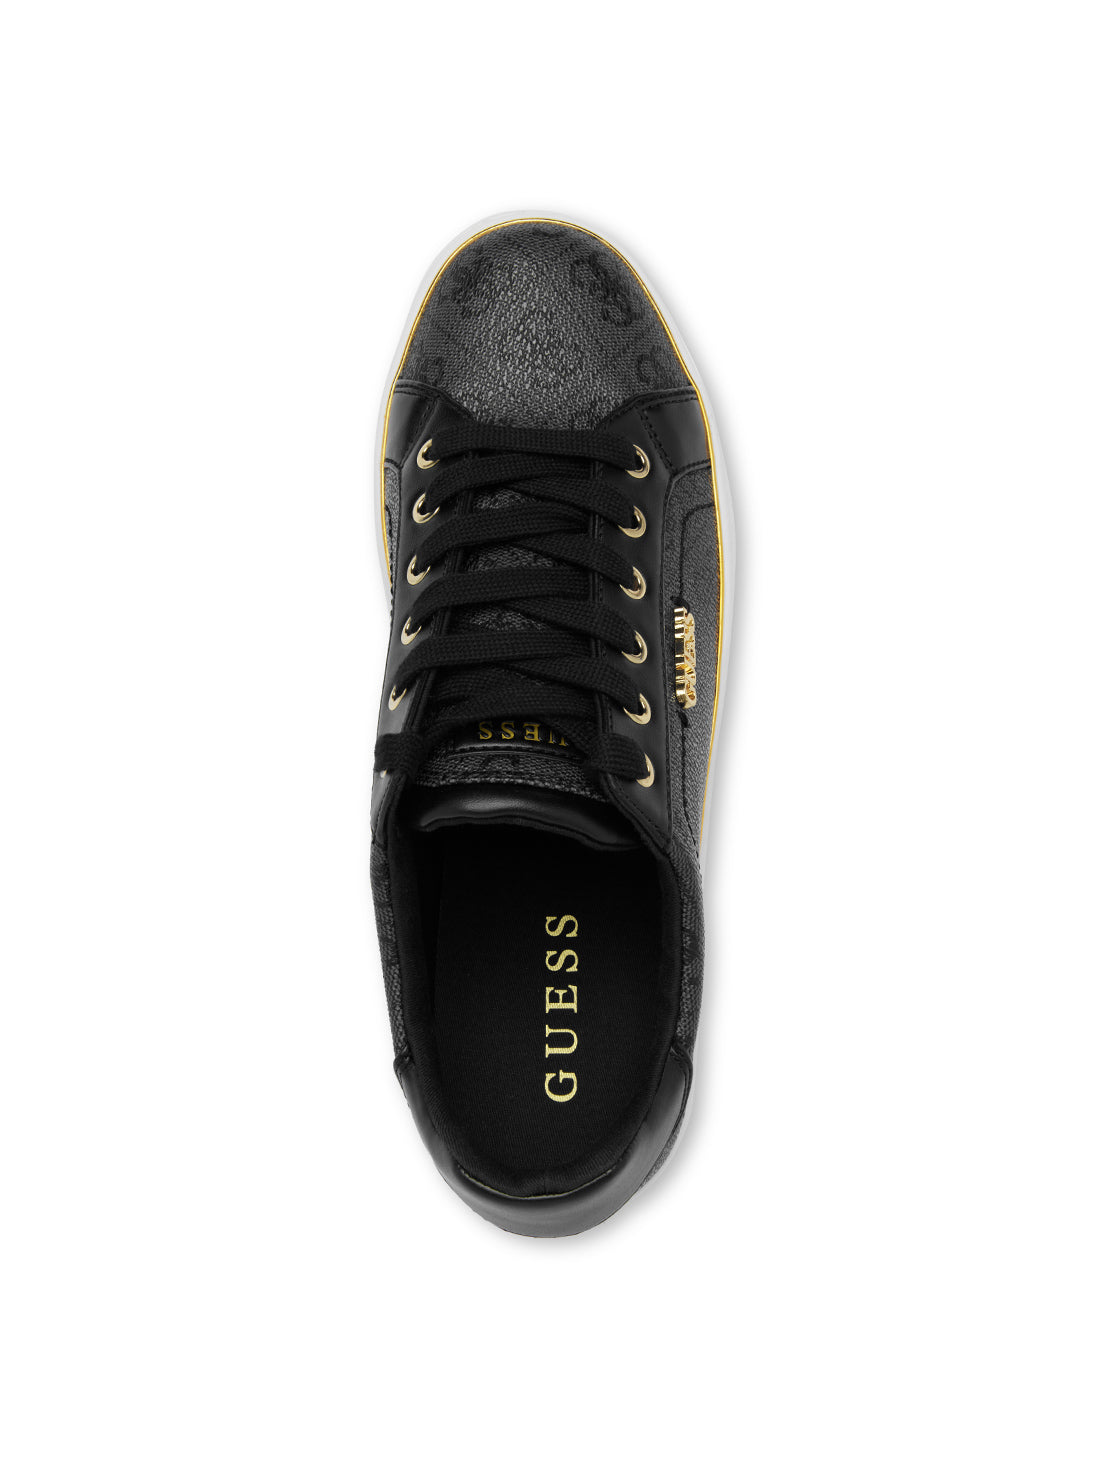 Black Logo Beckie Sneakers | GUESS Women's Shoes | top view